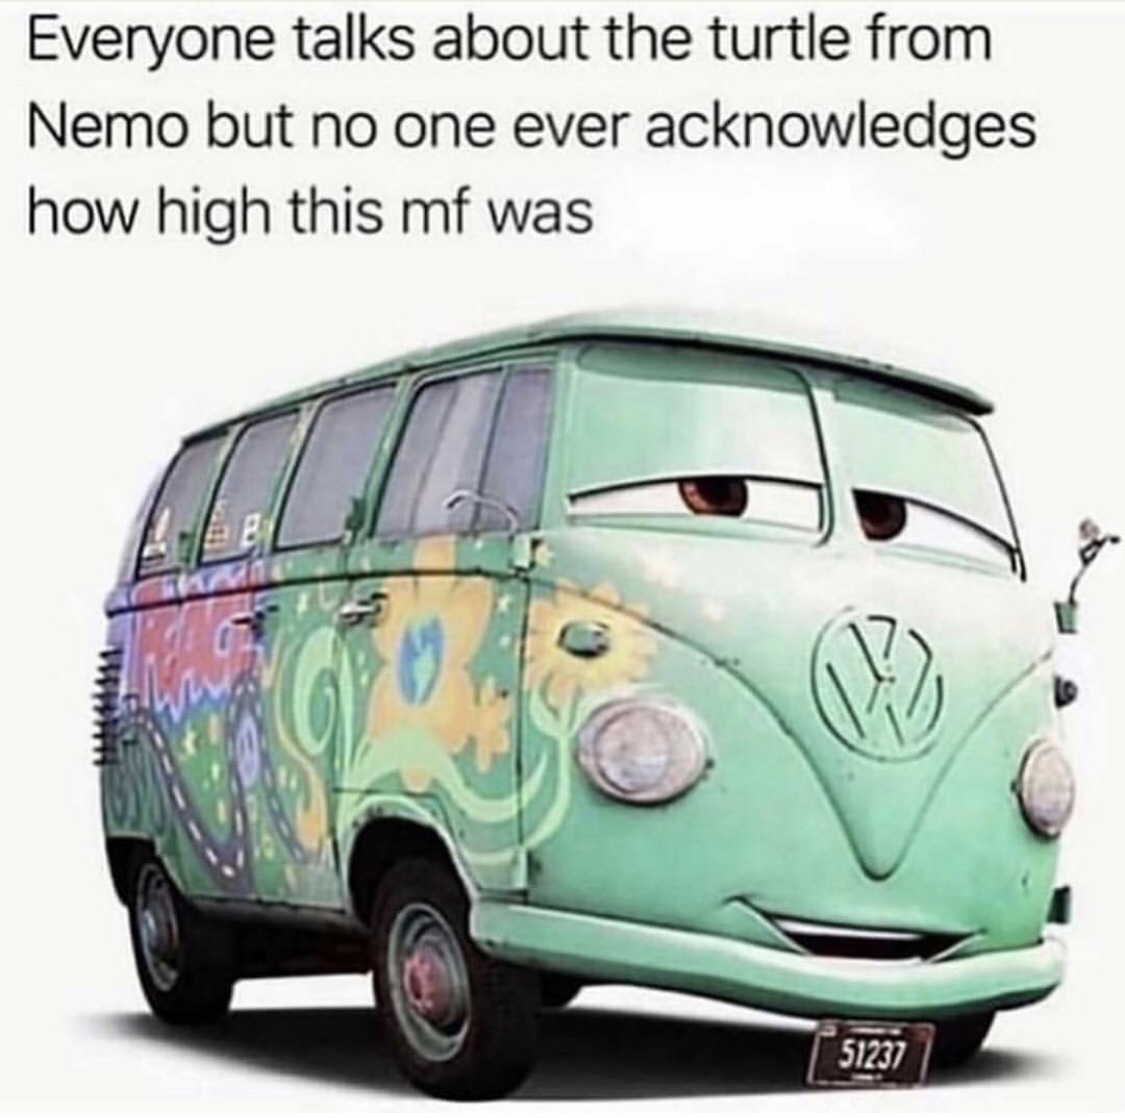 fillmore cars - Everyone talks about the turtle from Nemo but no one ever acknowledges how high this mf was 51237